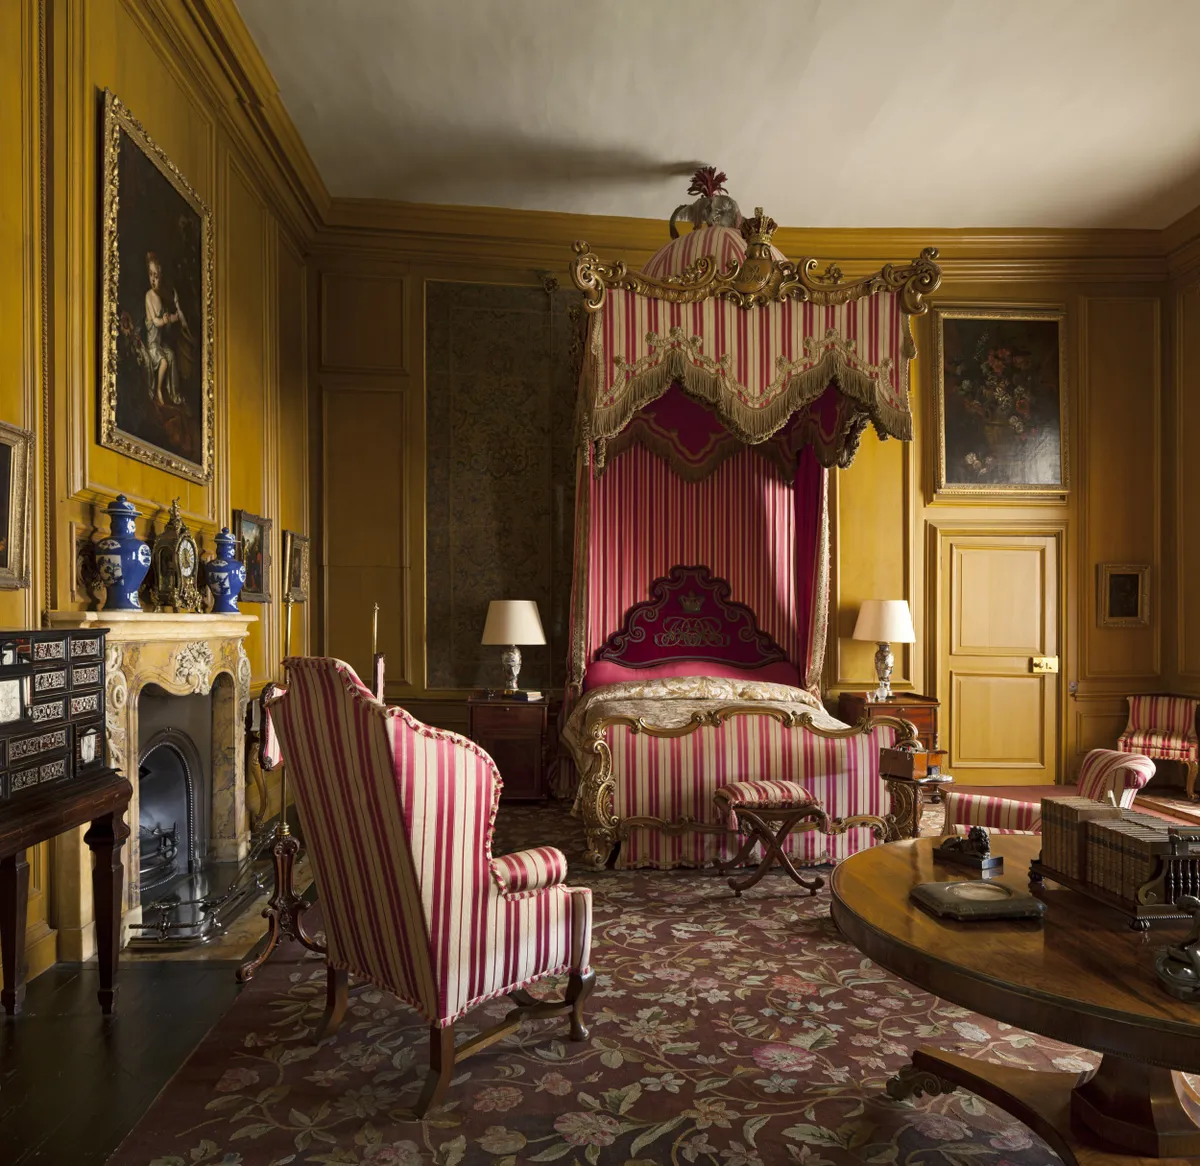 The Queen's Bedroom at Belton House, Lincolnshire.